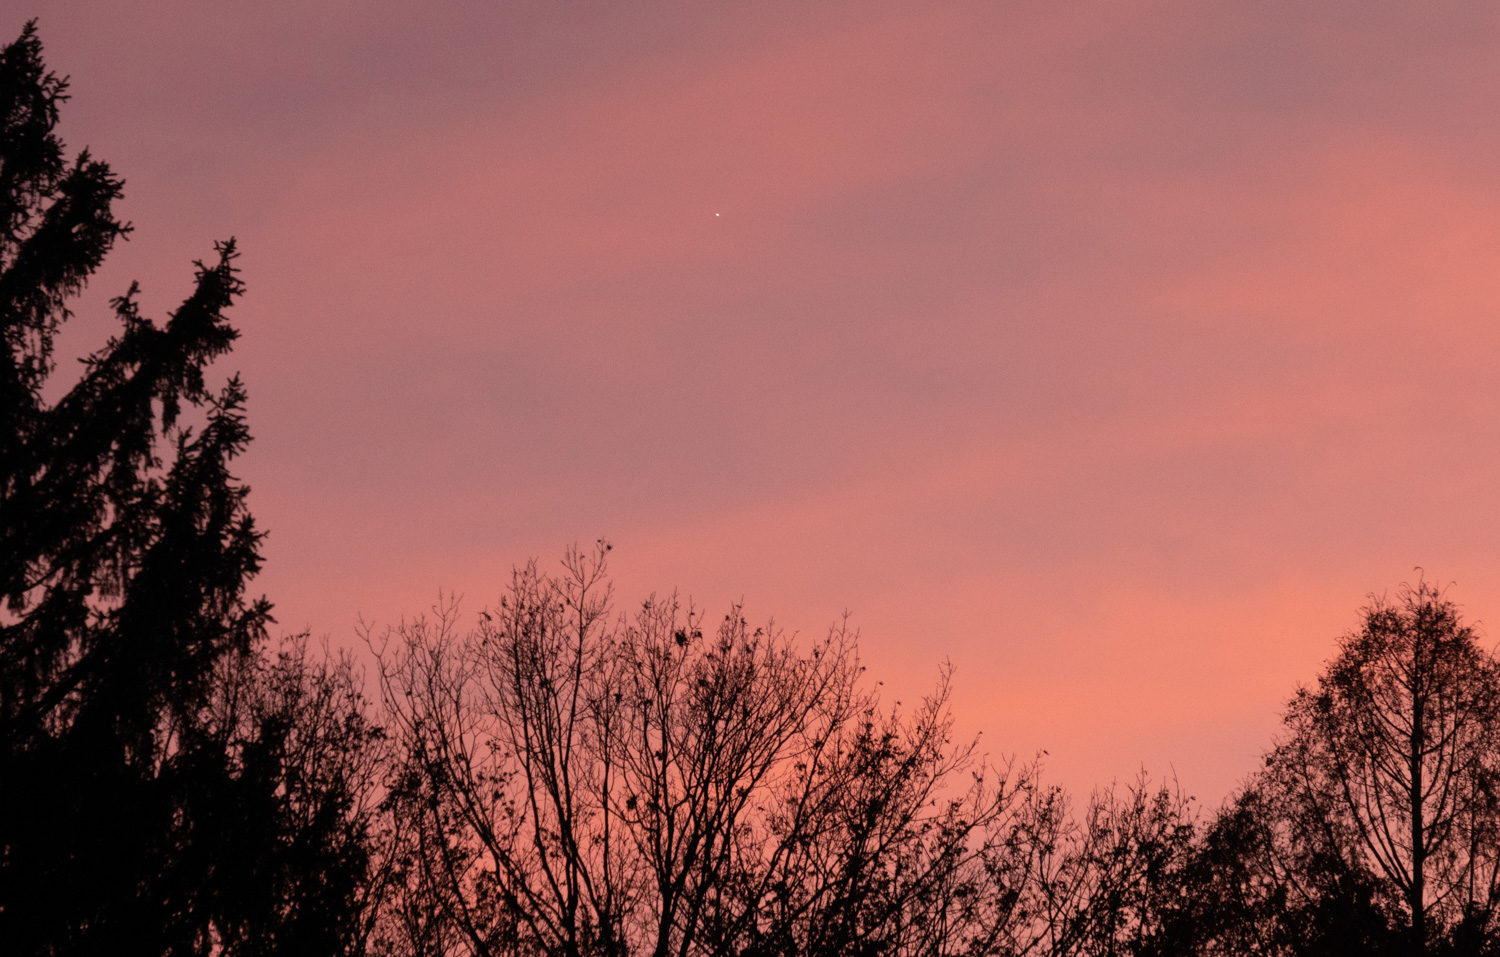 Trees backlit by pink sunset. Venus is visible as a white point.